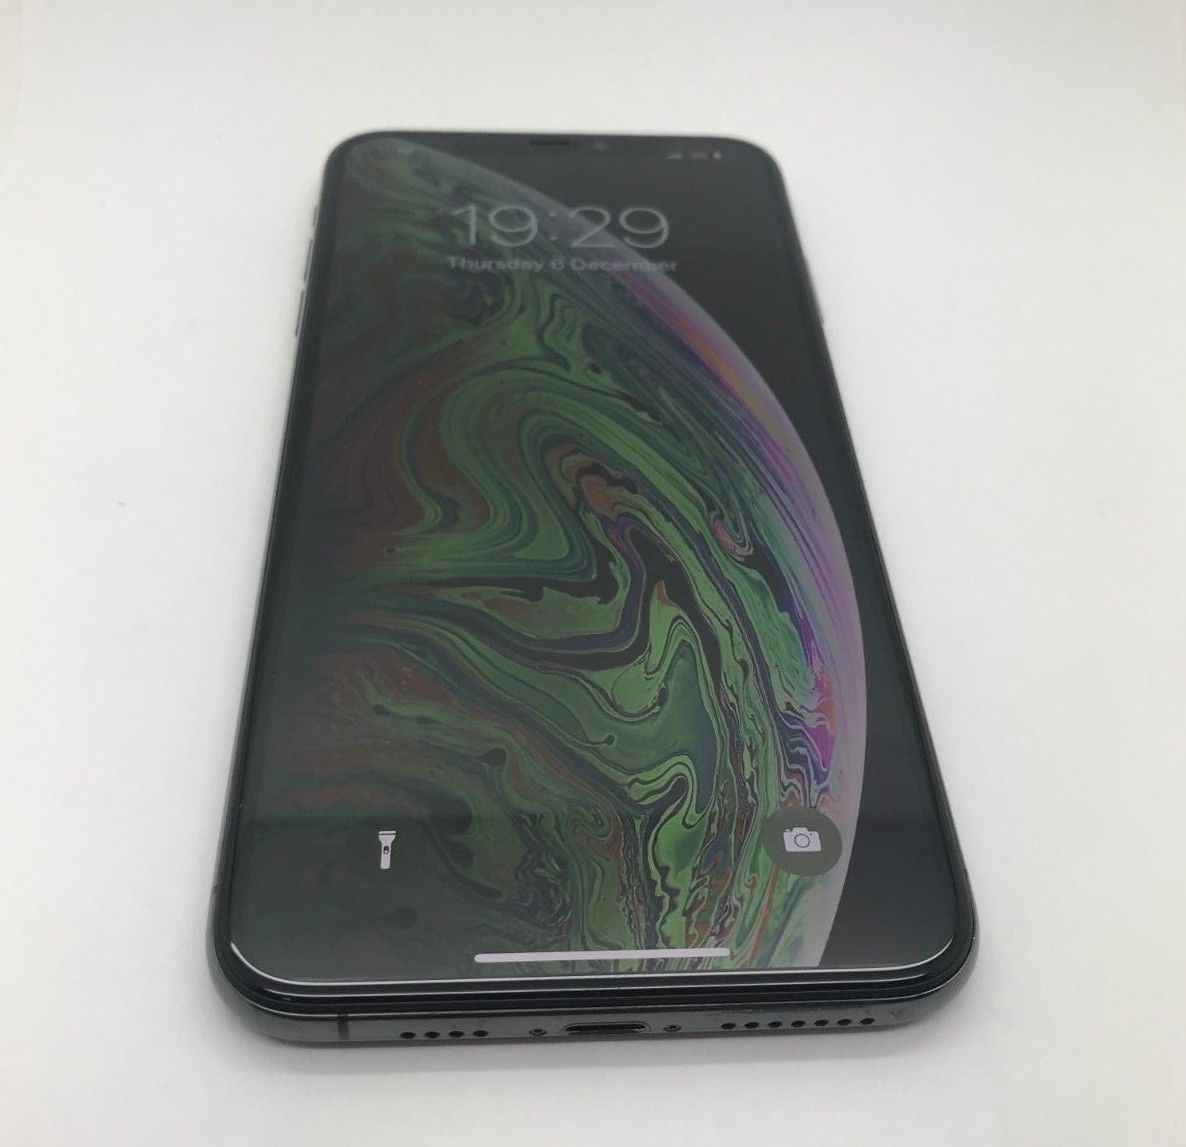 iPhone XS Max 512GB Space Gray